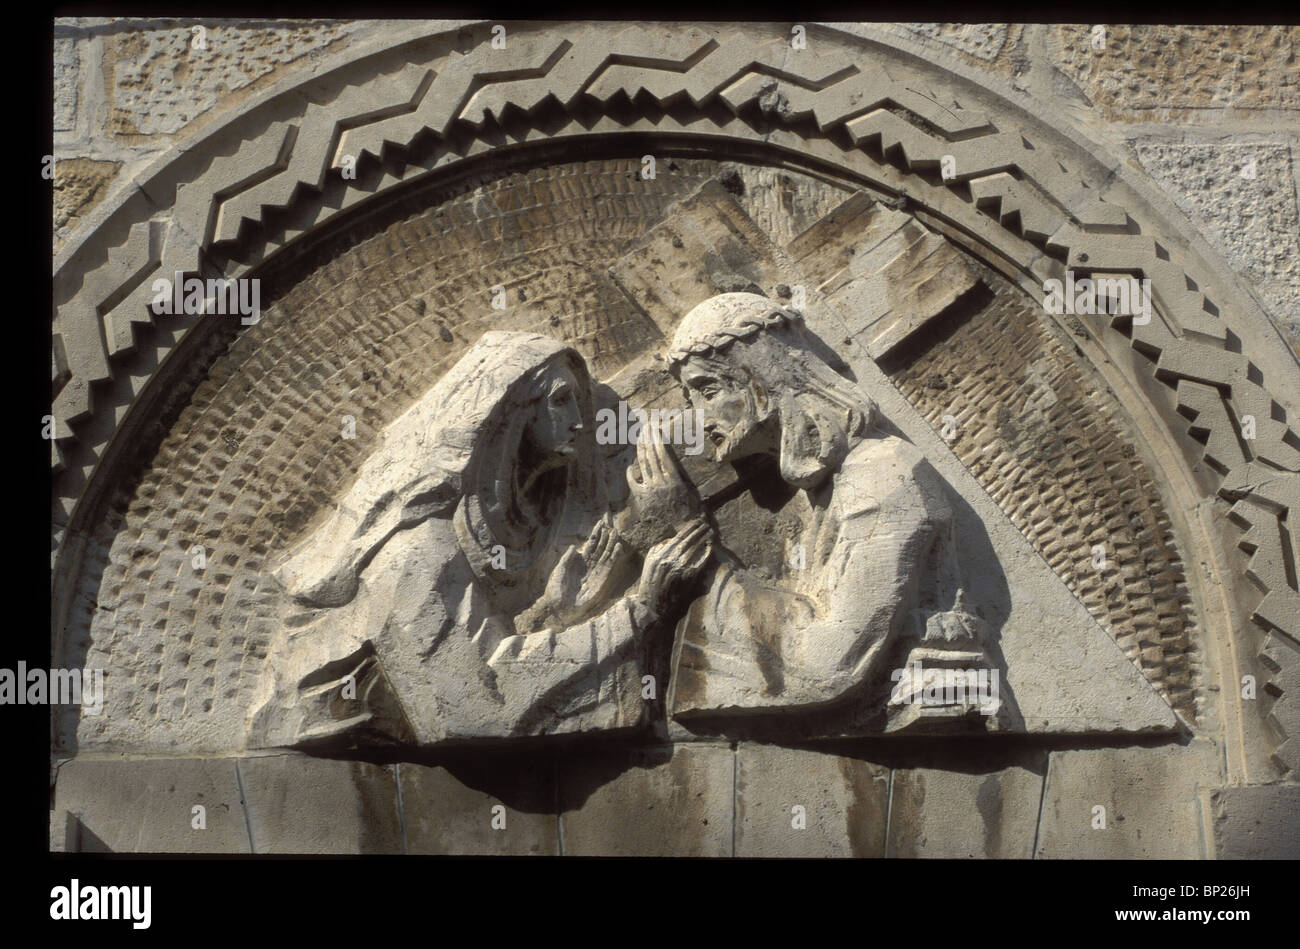 1126. VIA DOLOROSA, IV. STATION, WHERE JESUS MET HIS MOTHER (STONE CARVING BY THE POLISH ARTIST ZIELINSKY) Stock Photo